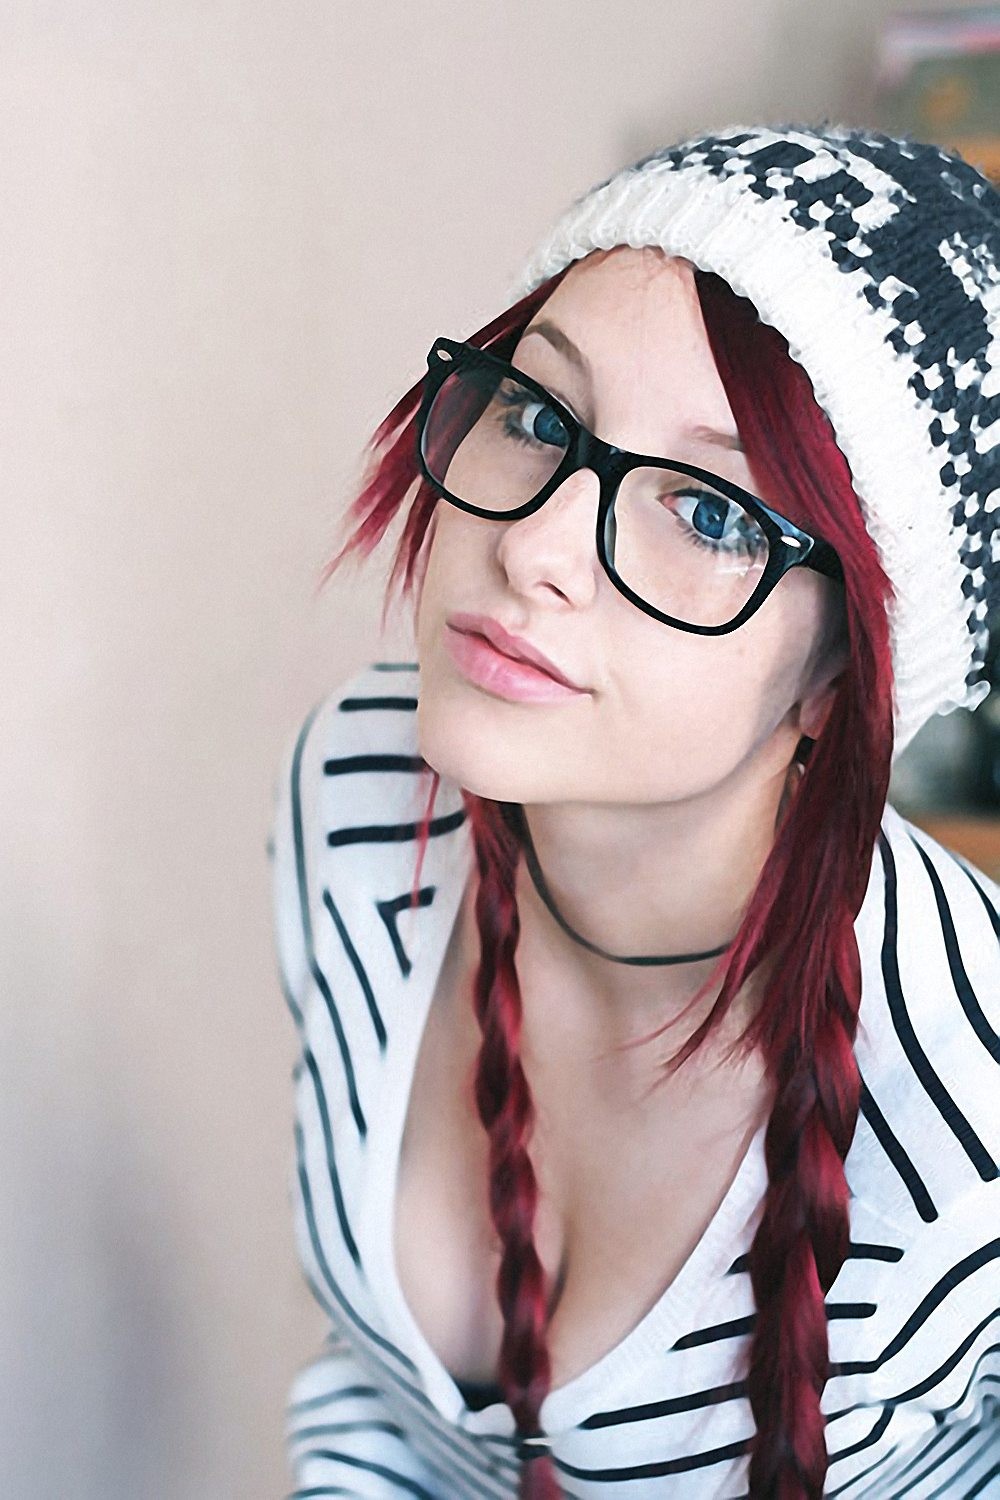 Wallpaper - Hipster Girls With Glasses - HD Wallpaper 